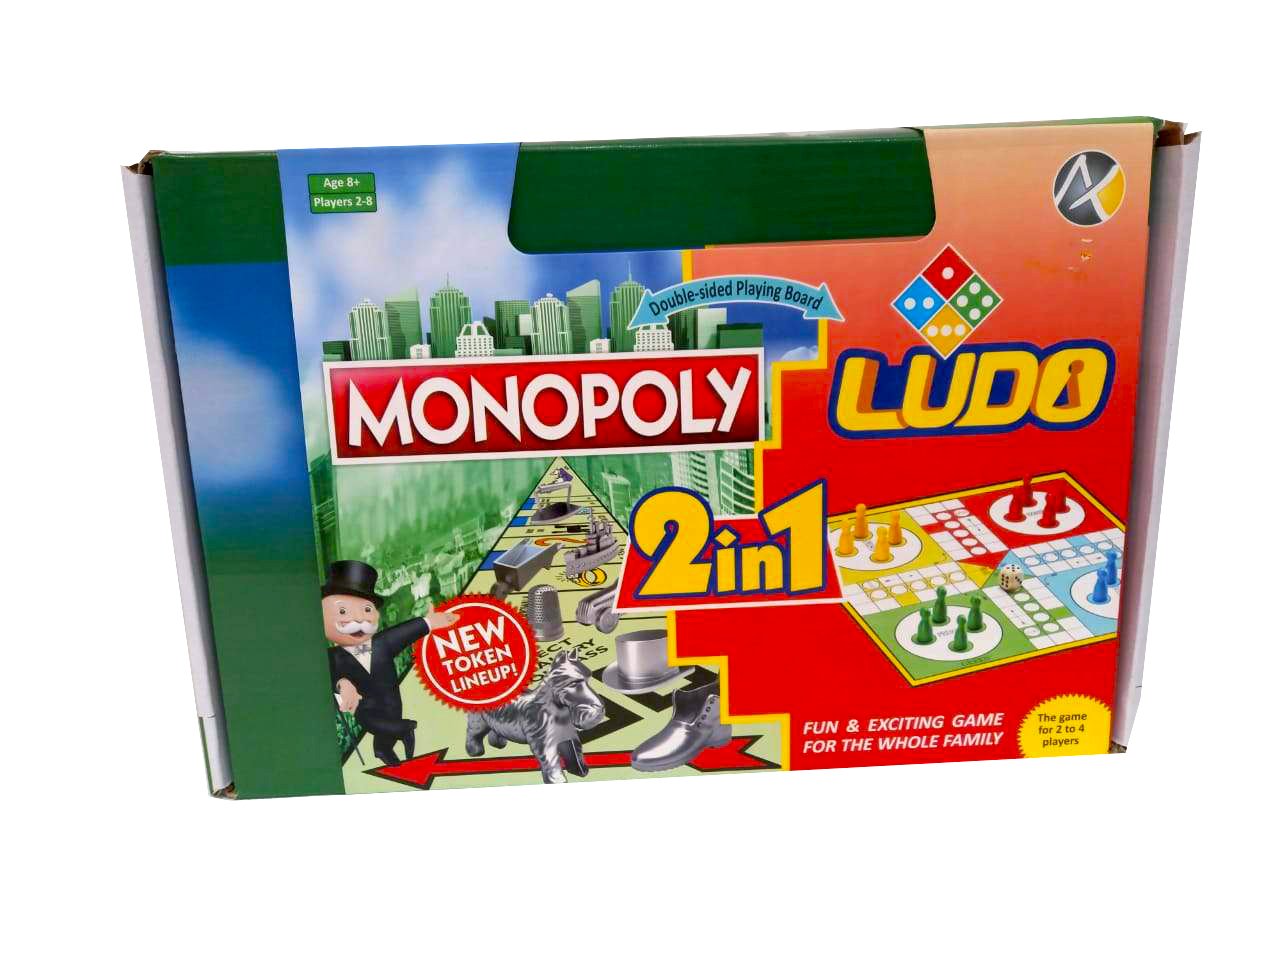 MONOPOLY AND LUDO 2 IN 1 GAME